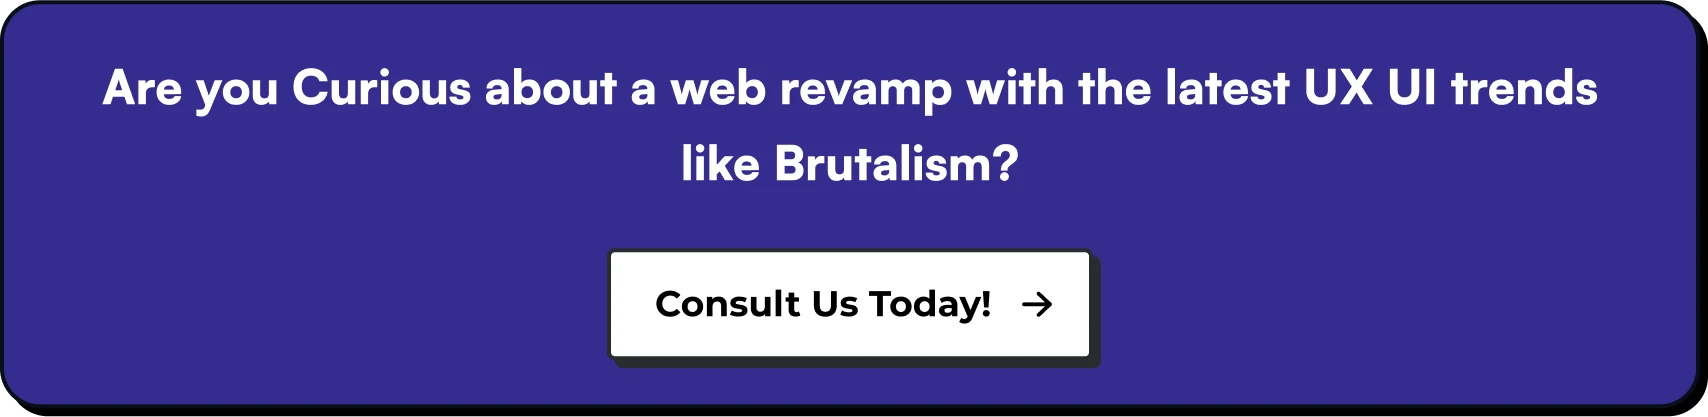 Are you Curious about a web revamp with the latest UI/UX design trends like Brutalism